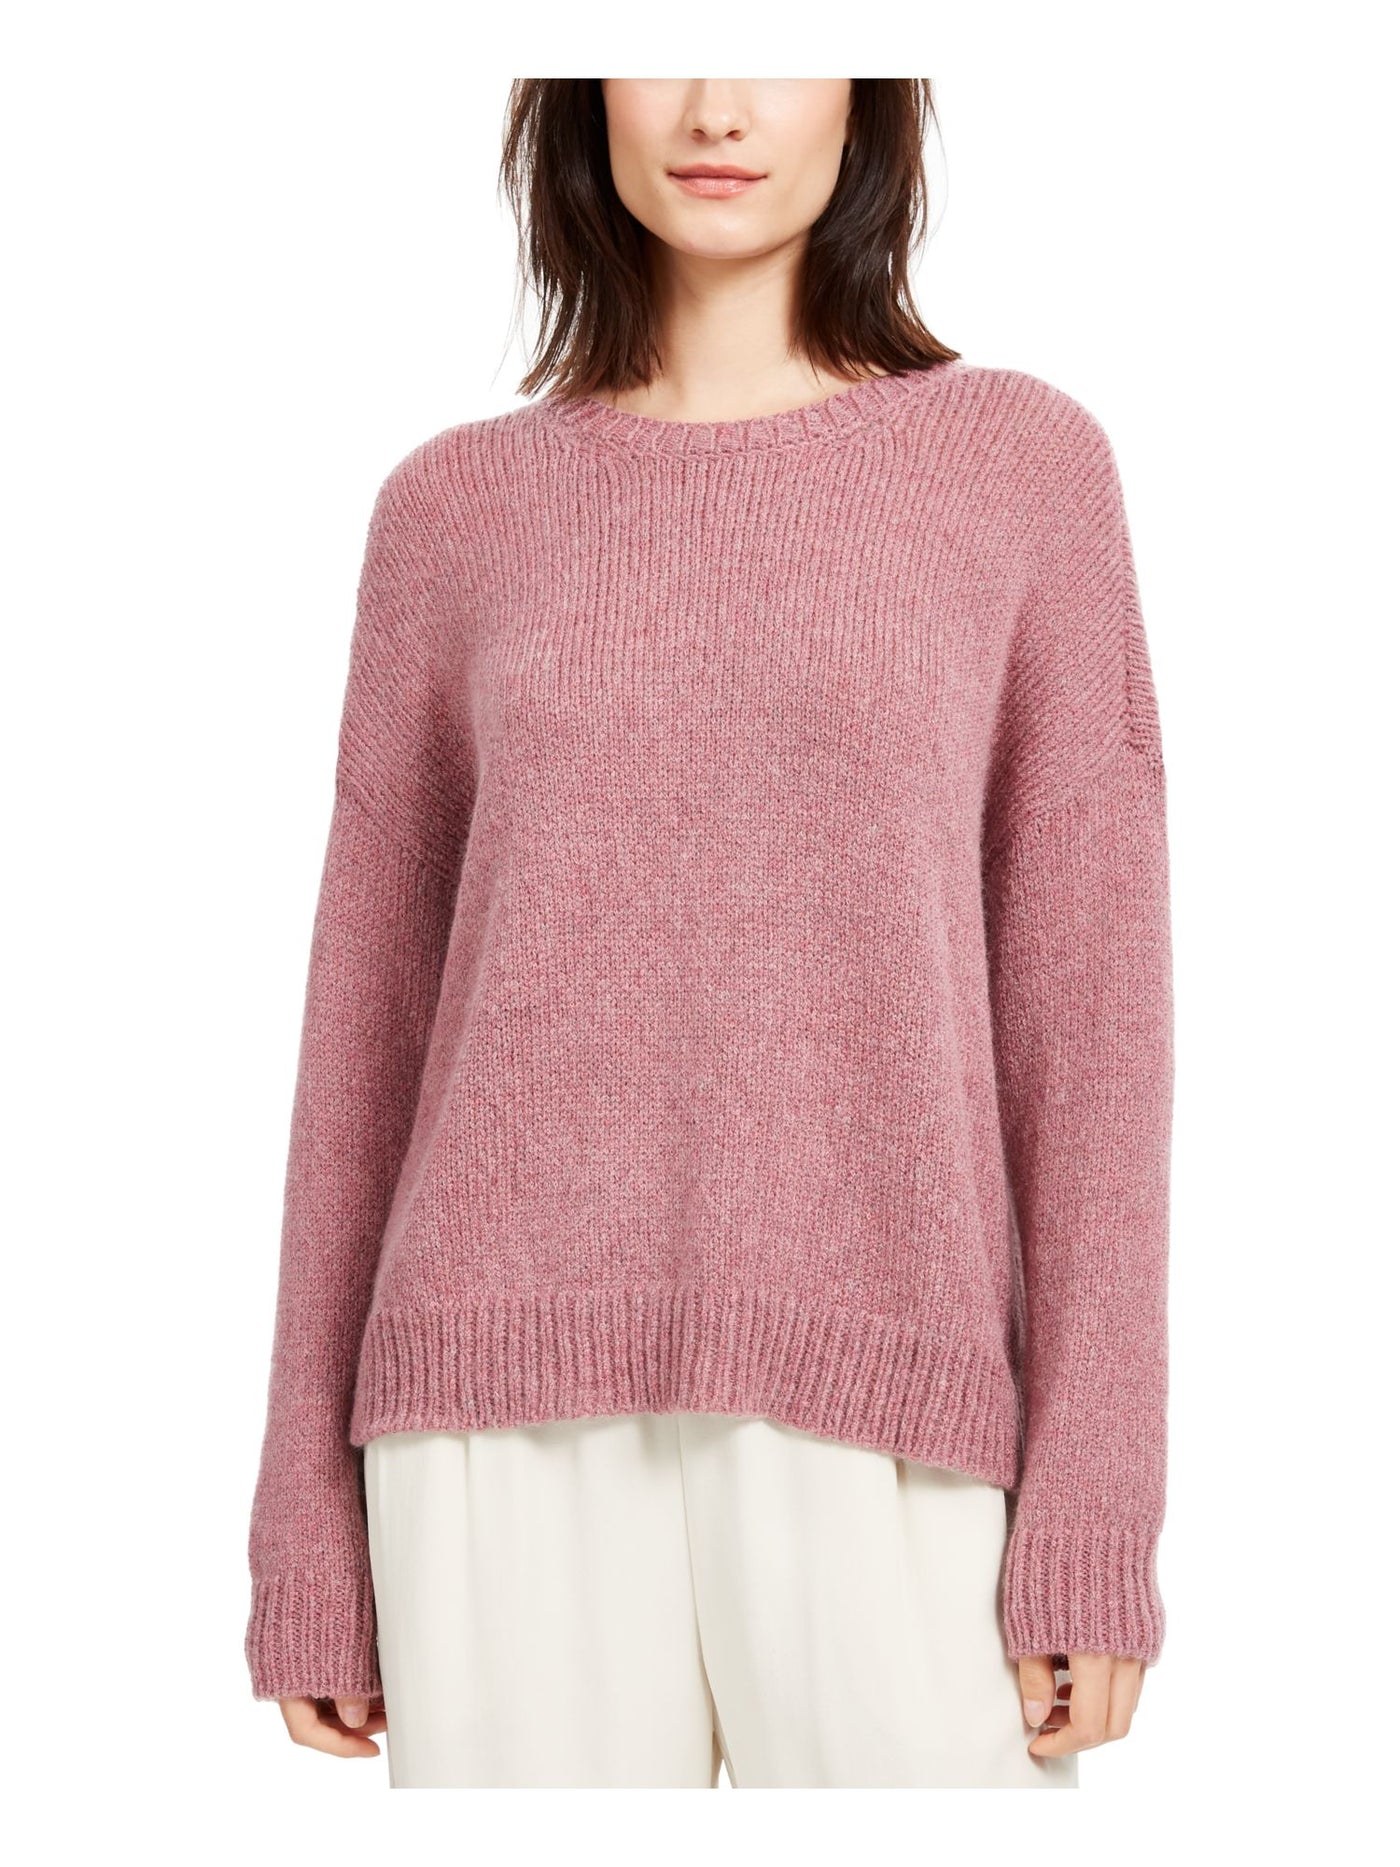 EILEEN FISHER Womens Pink Long Sleeve Crew Neck Sweater Petites PM